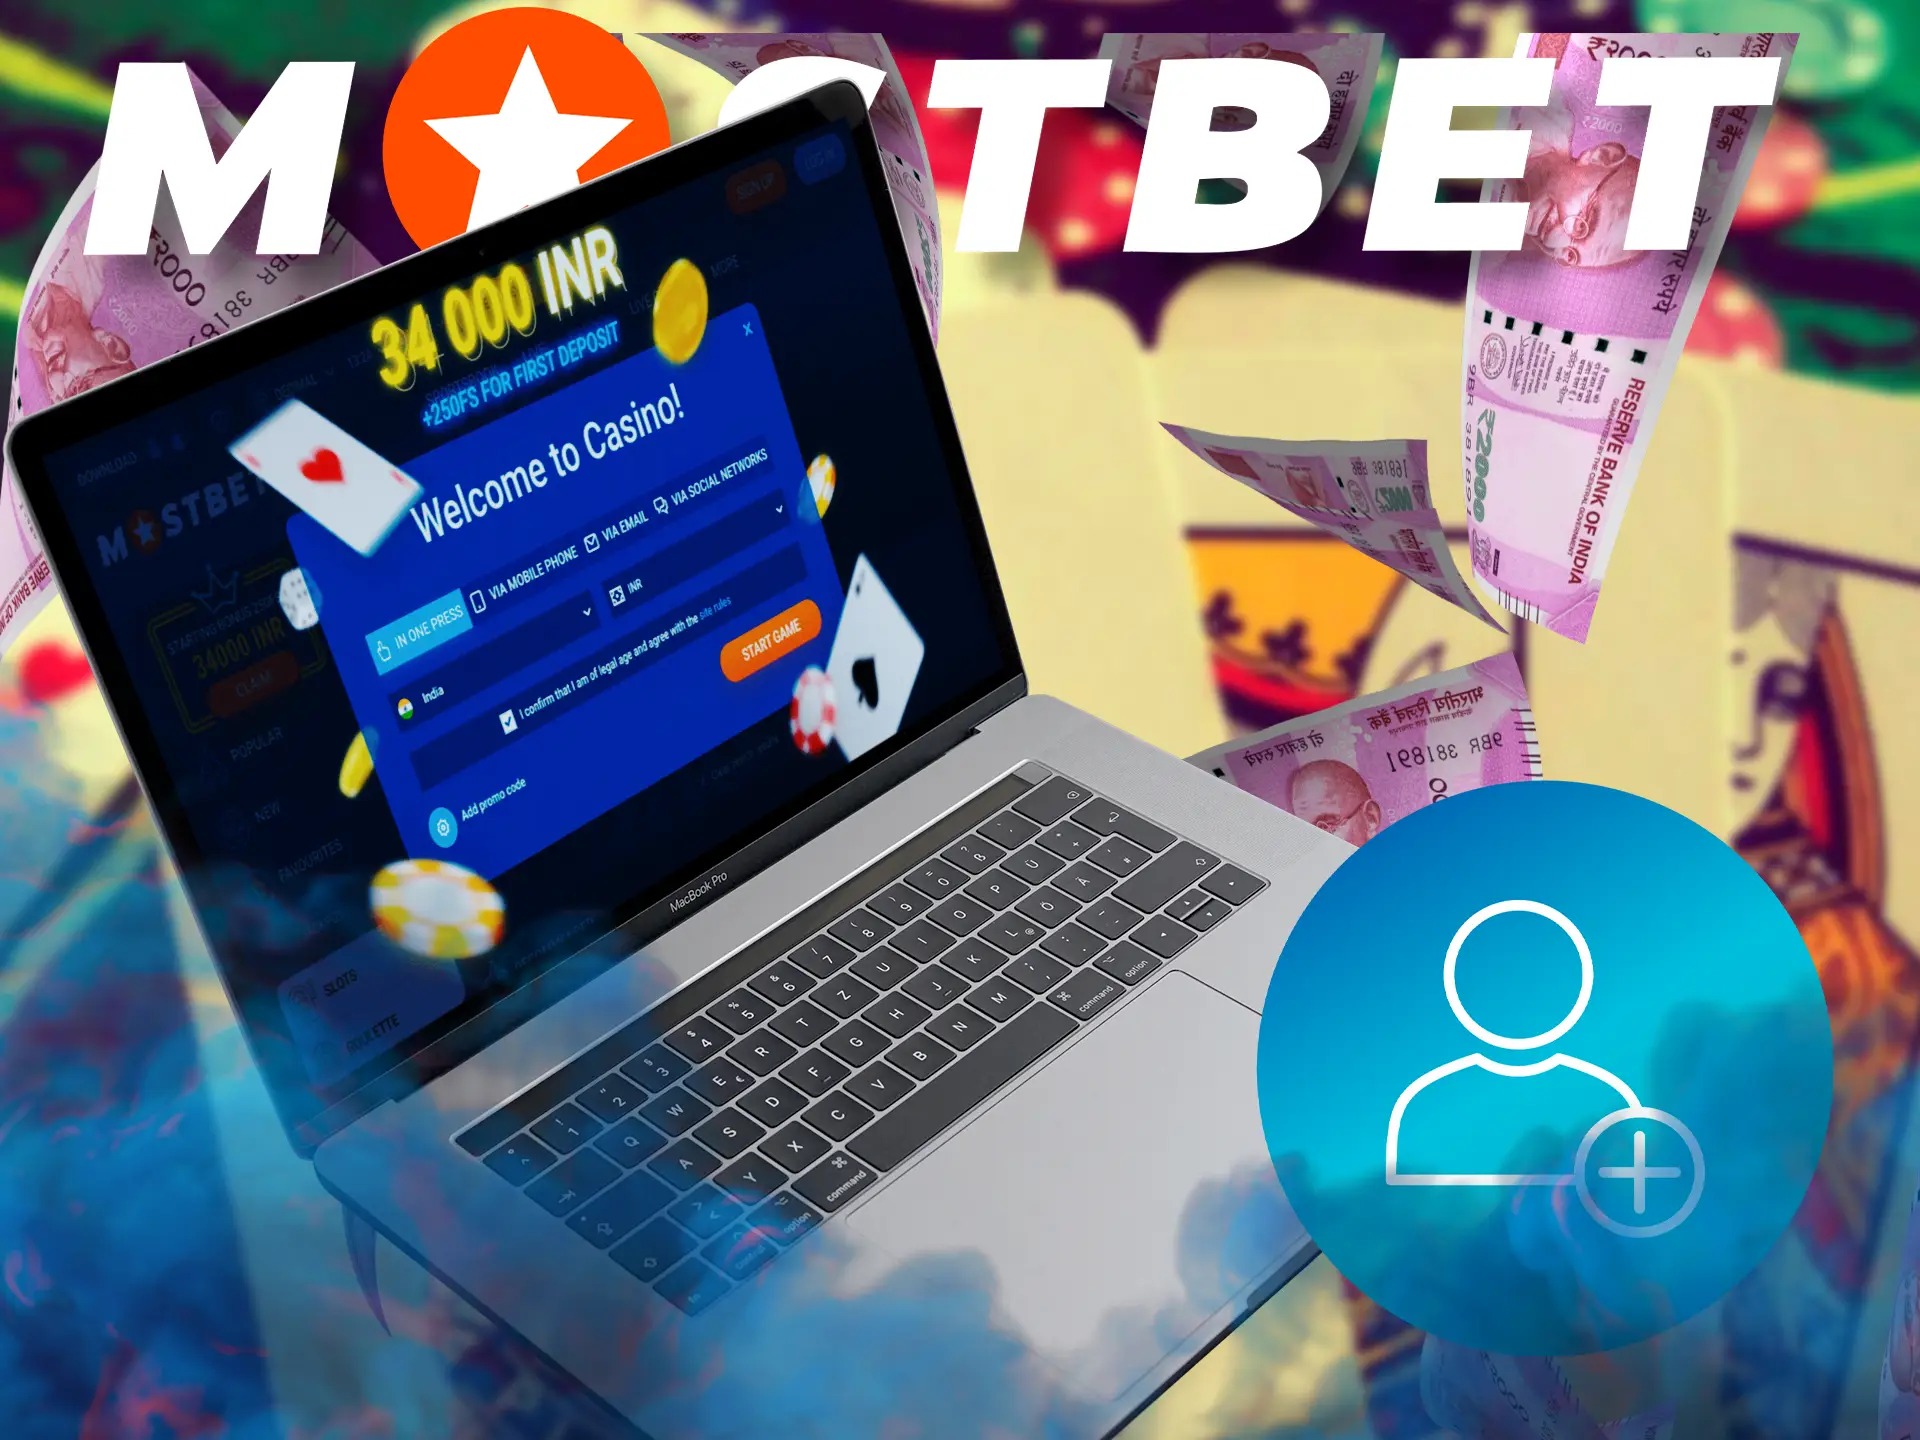 It is important to realise that to start catching big wins you must create and fund your Mostbet account.